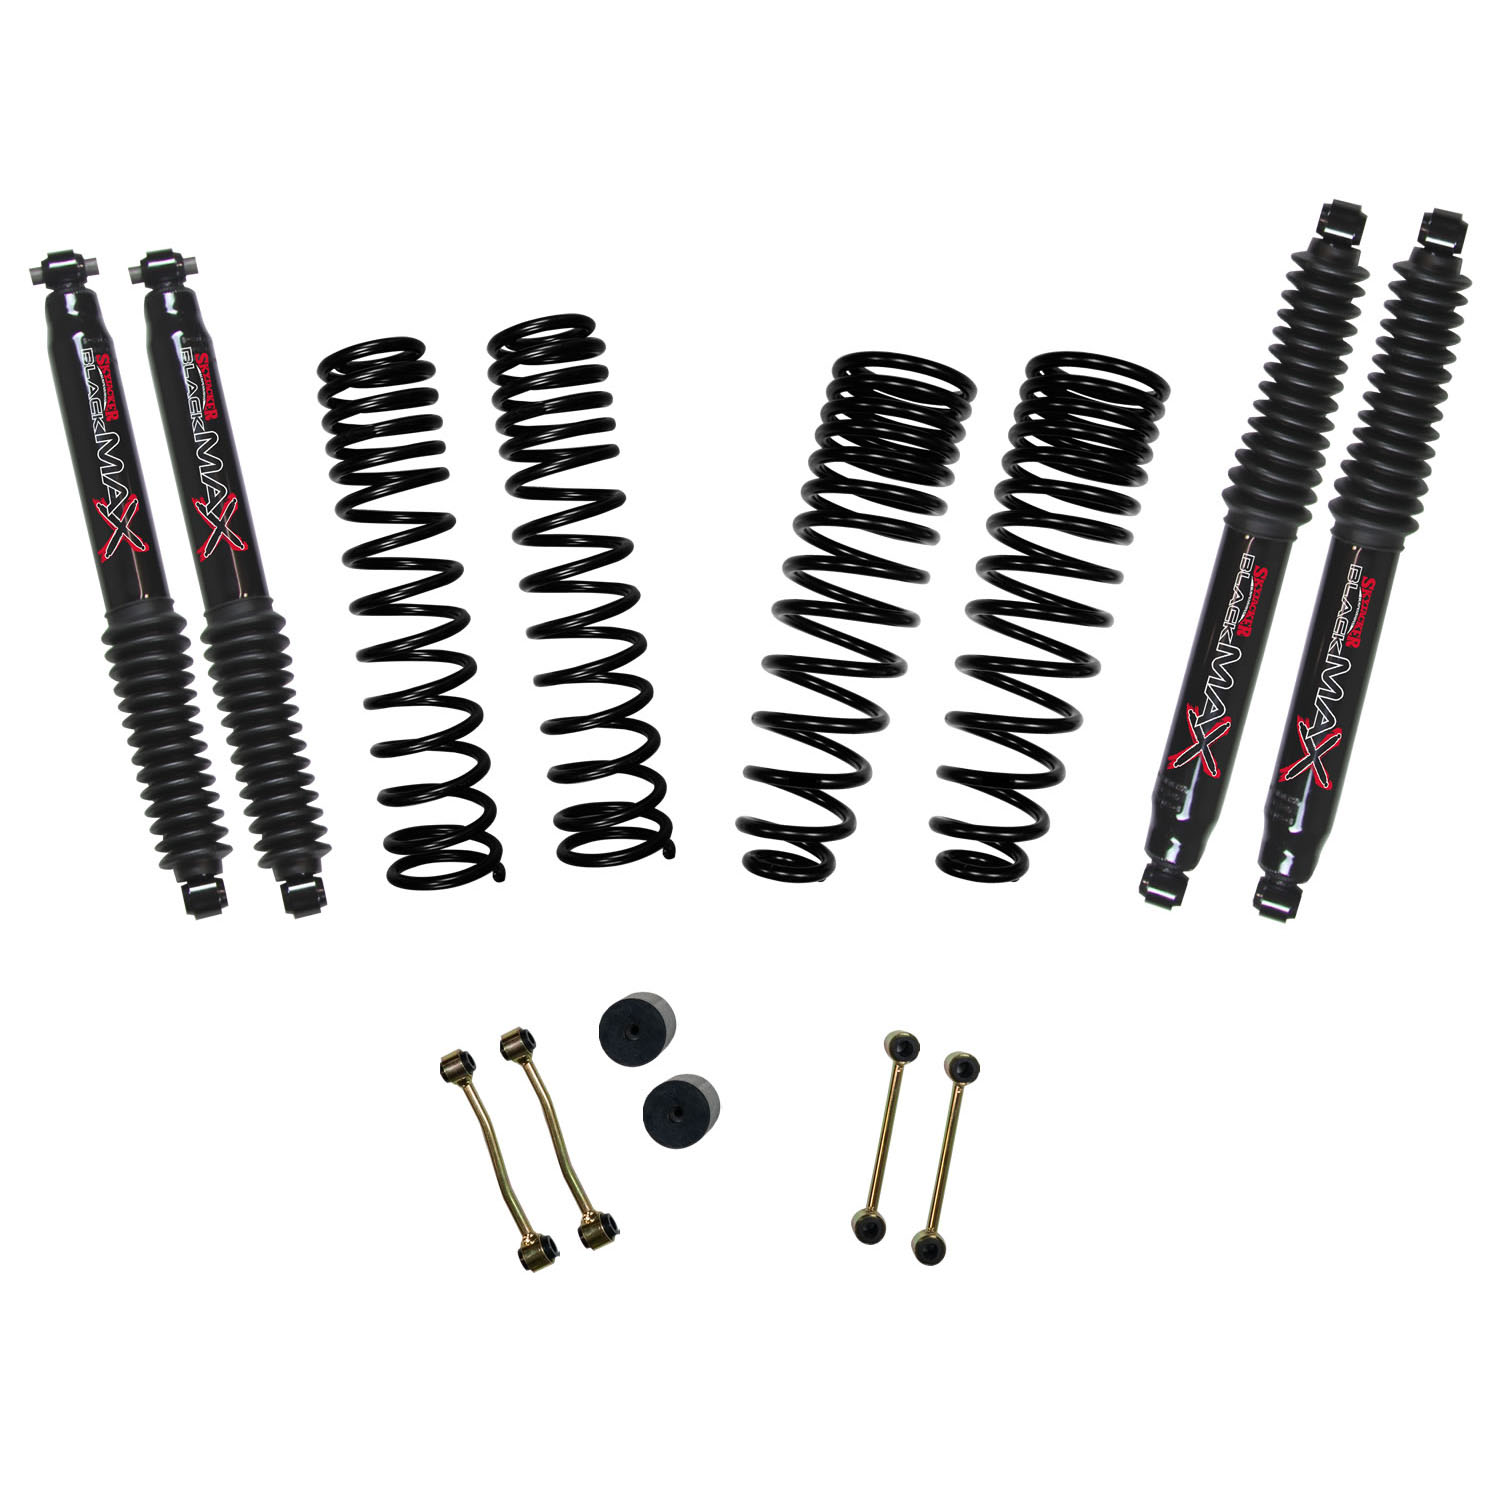 2.500 in. Dual-Rate Long-Travel Lift Kit for 2020 Jeep Gladiator JT Truck 4-Door Rubicon